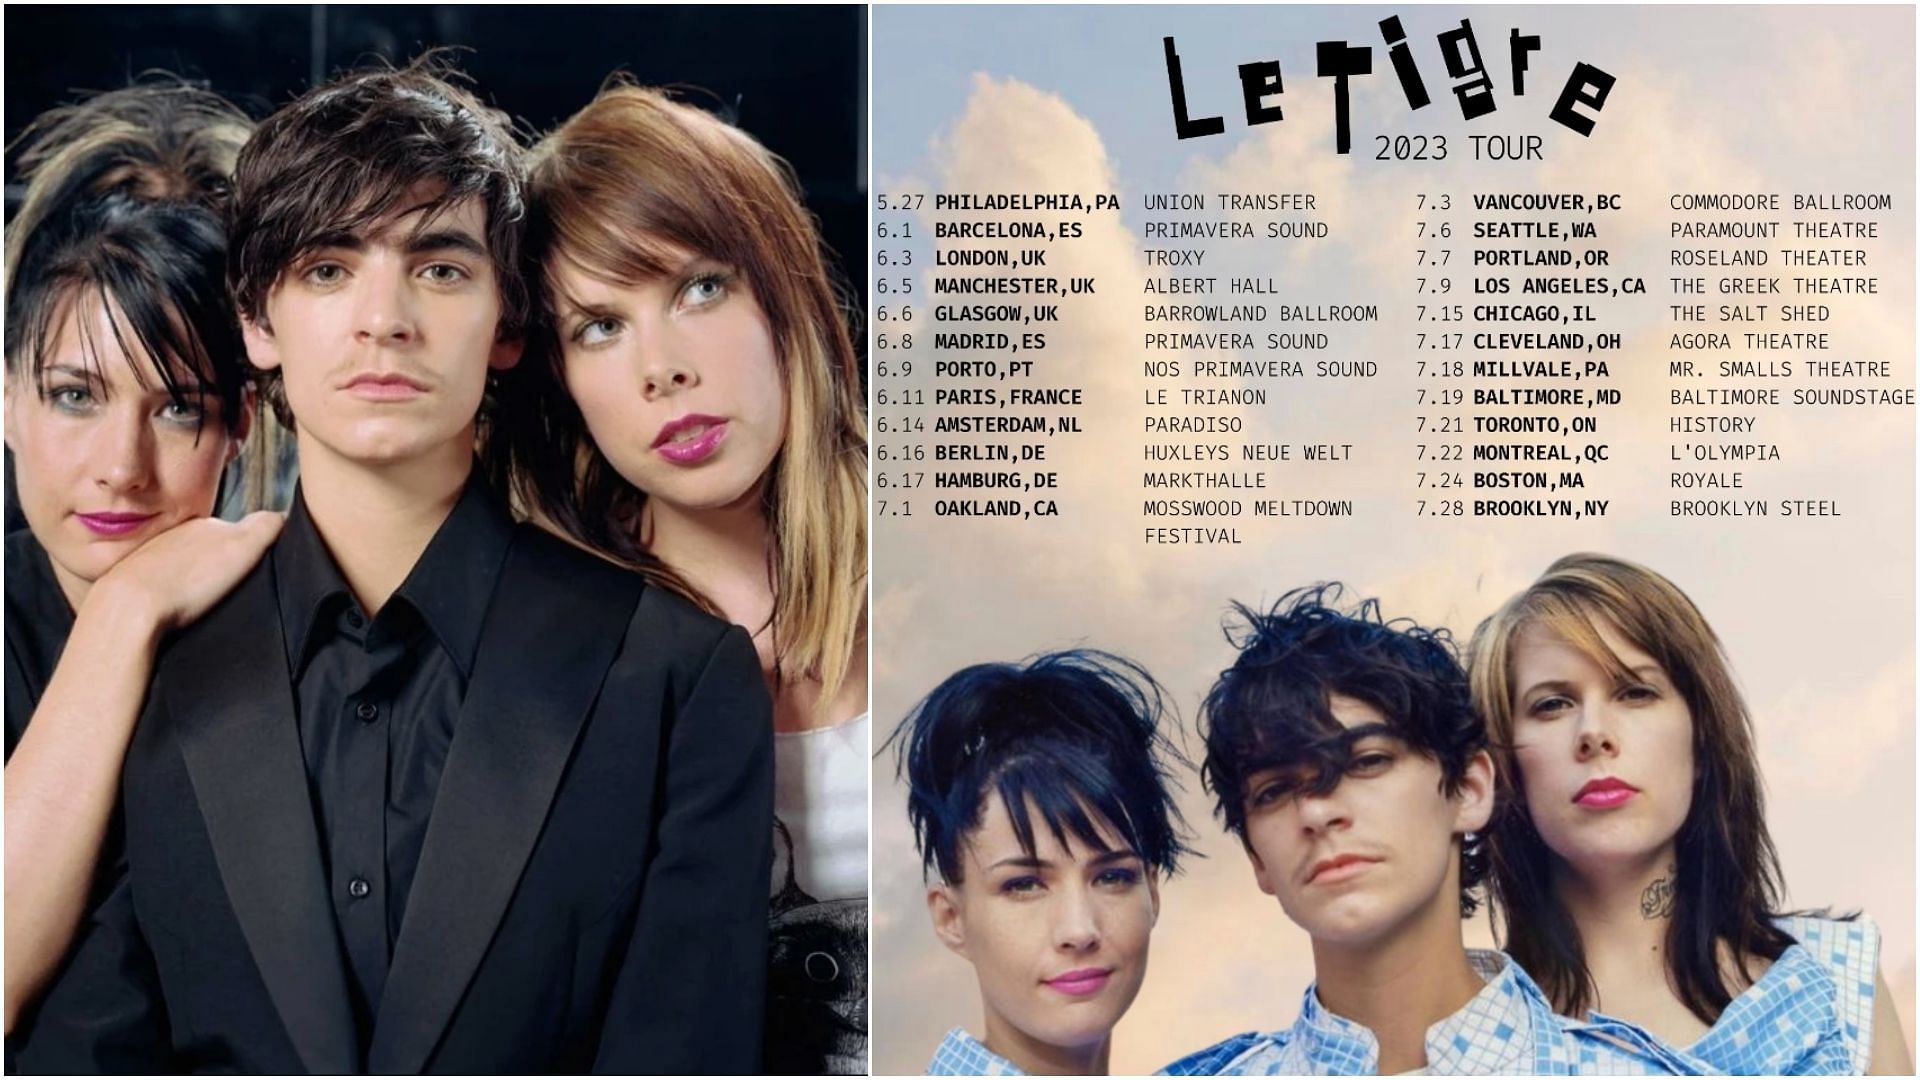 Le Tigre Tour 2023 Tickets, presale, where to buy, dates, venues and more